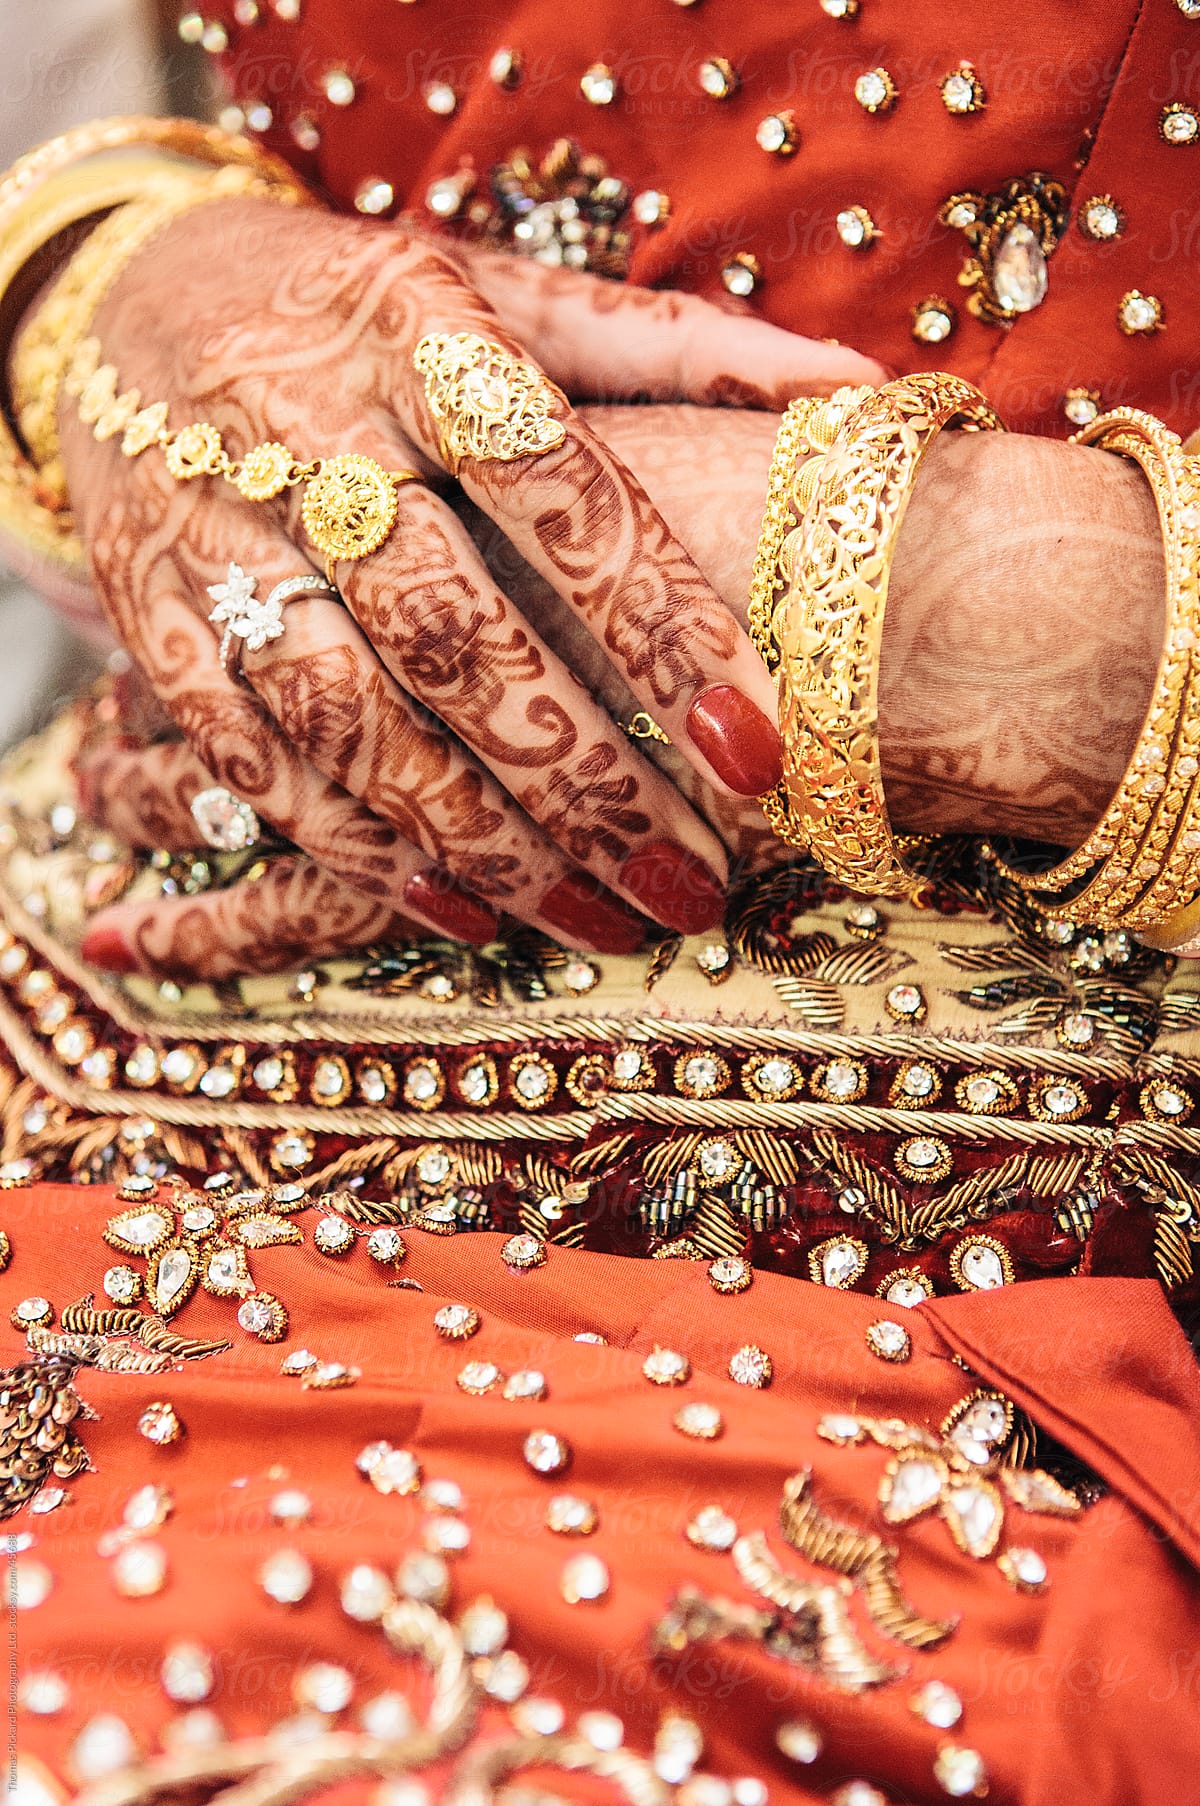 Indian woman's hands painted with henna.